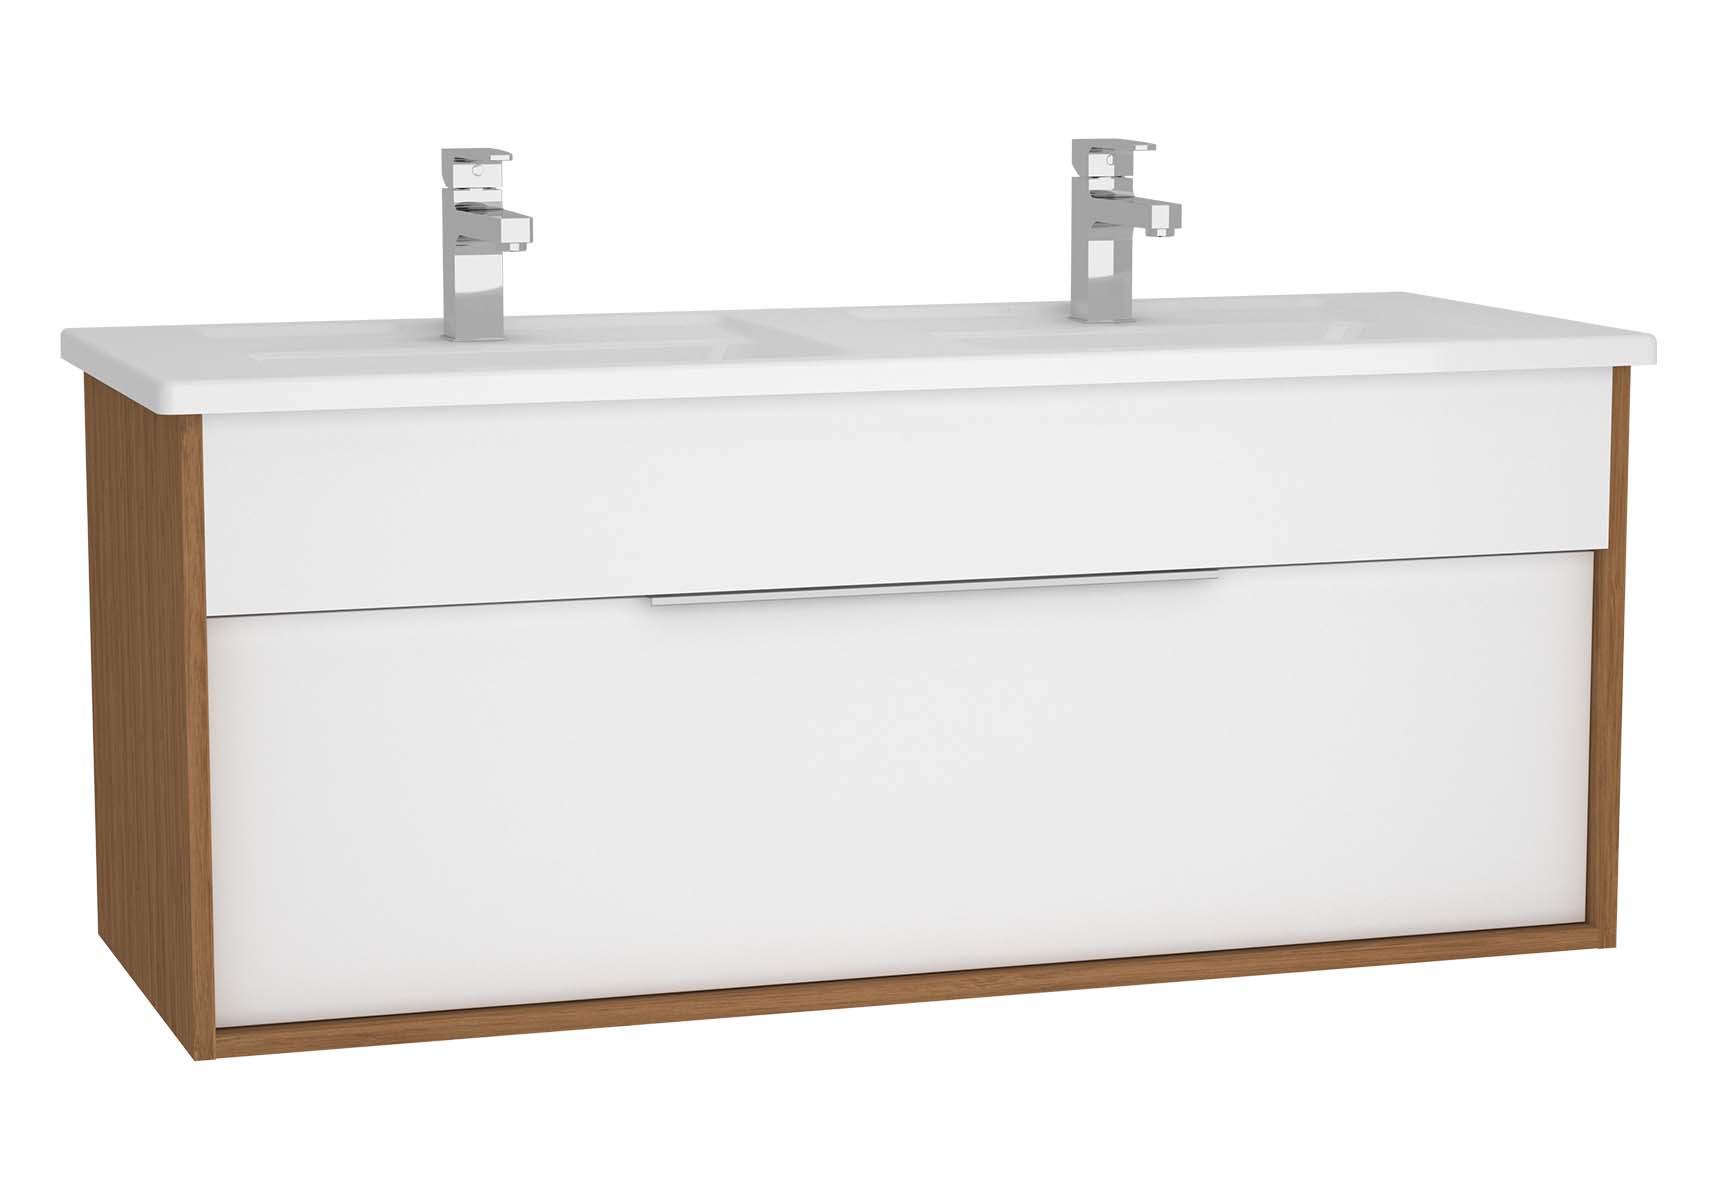 Integra Washbasin Unit, 120 cm, with 1 drawer, with double washbasin, White High Gloss & Bamboo